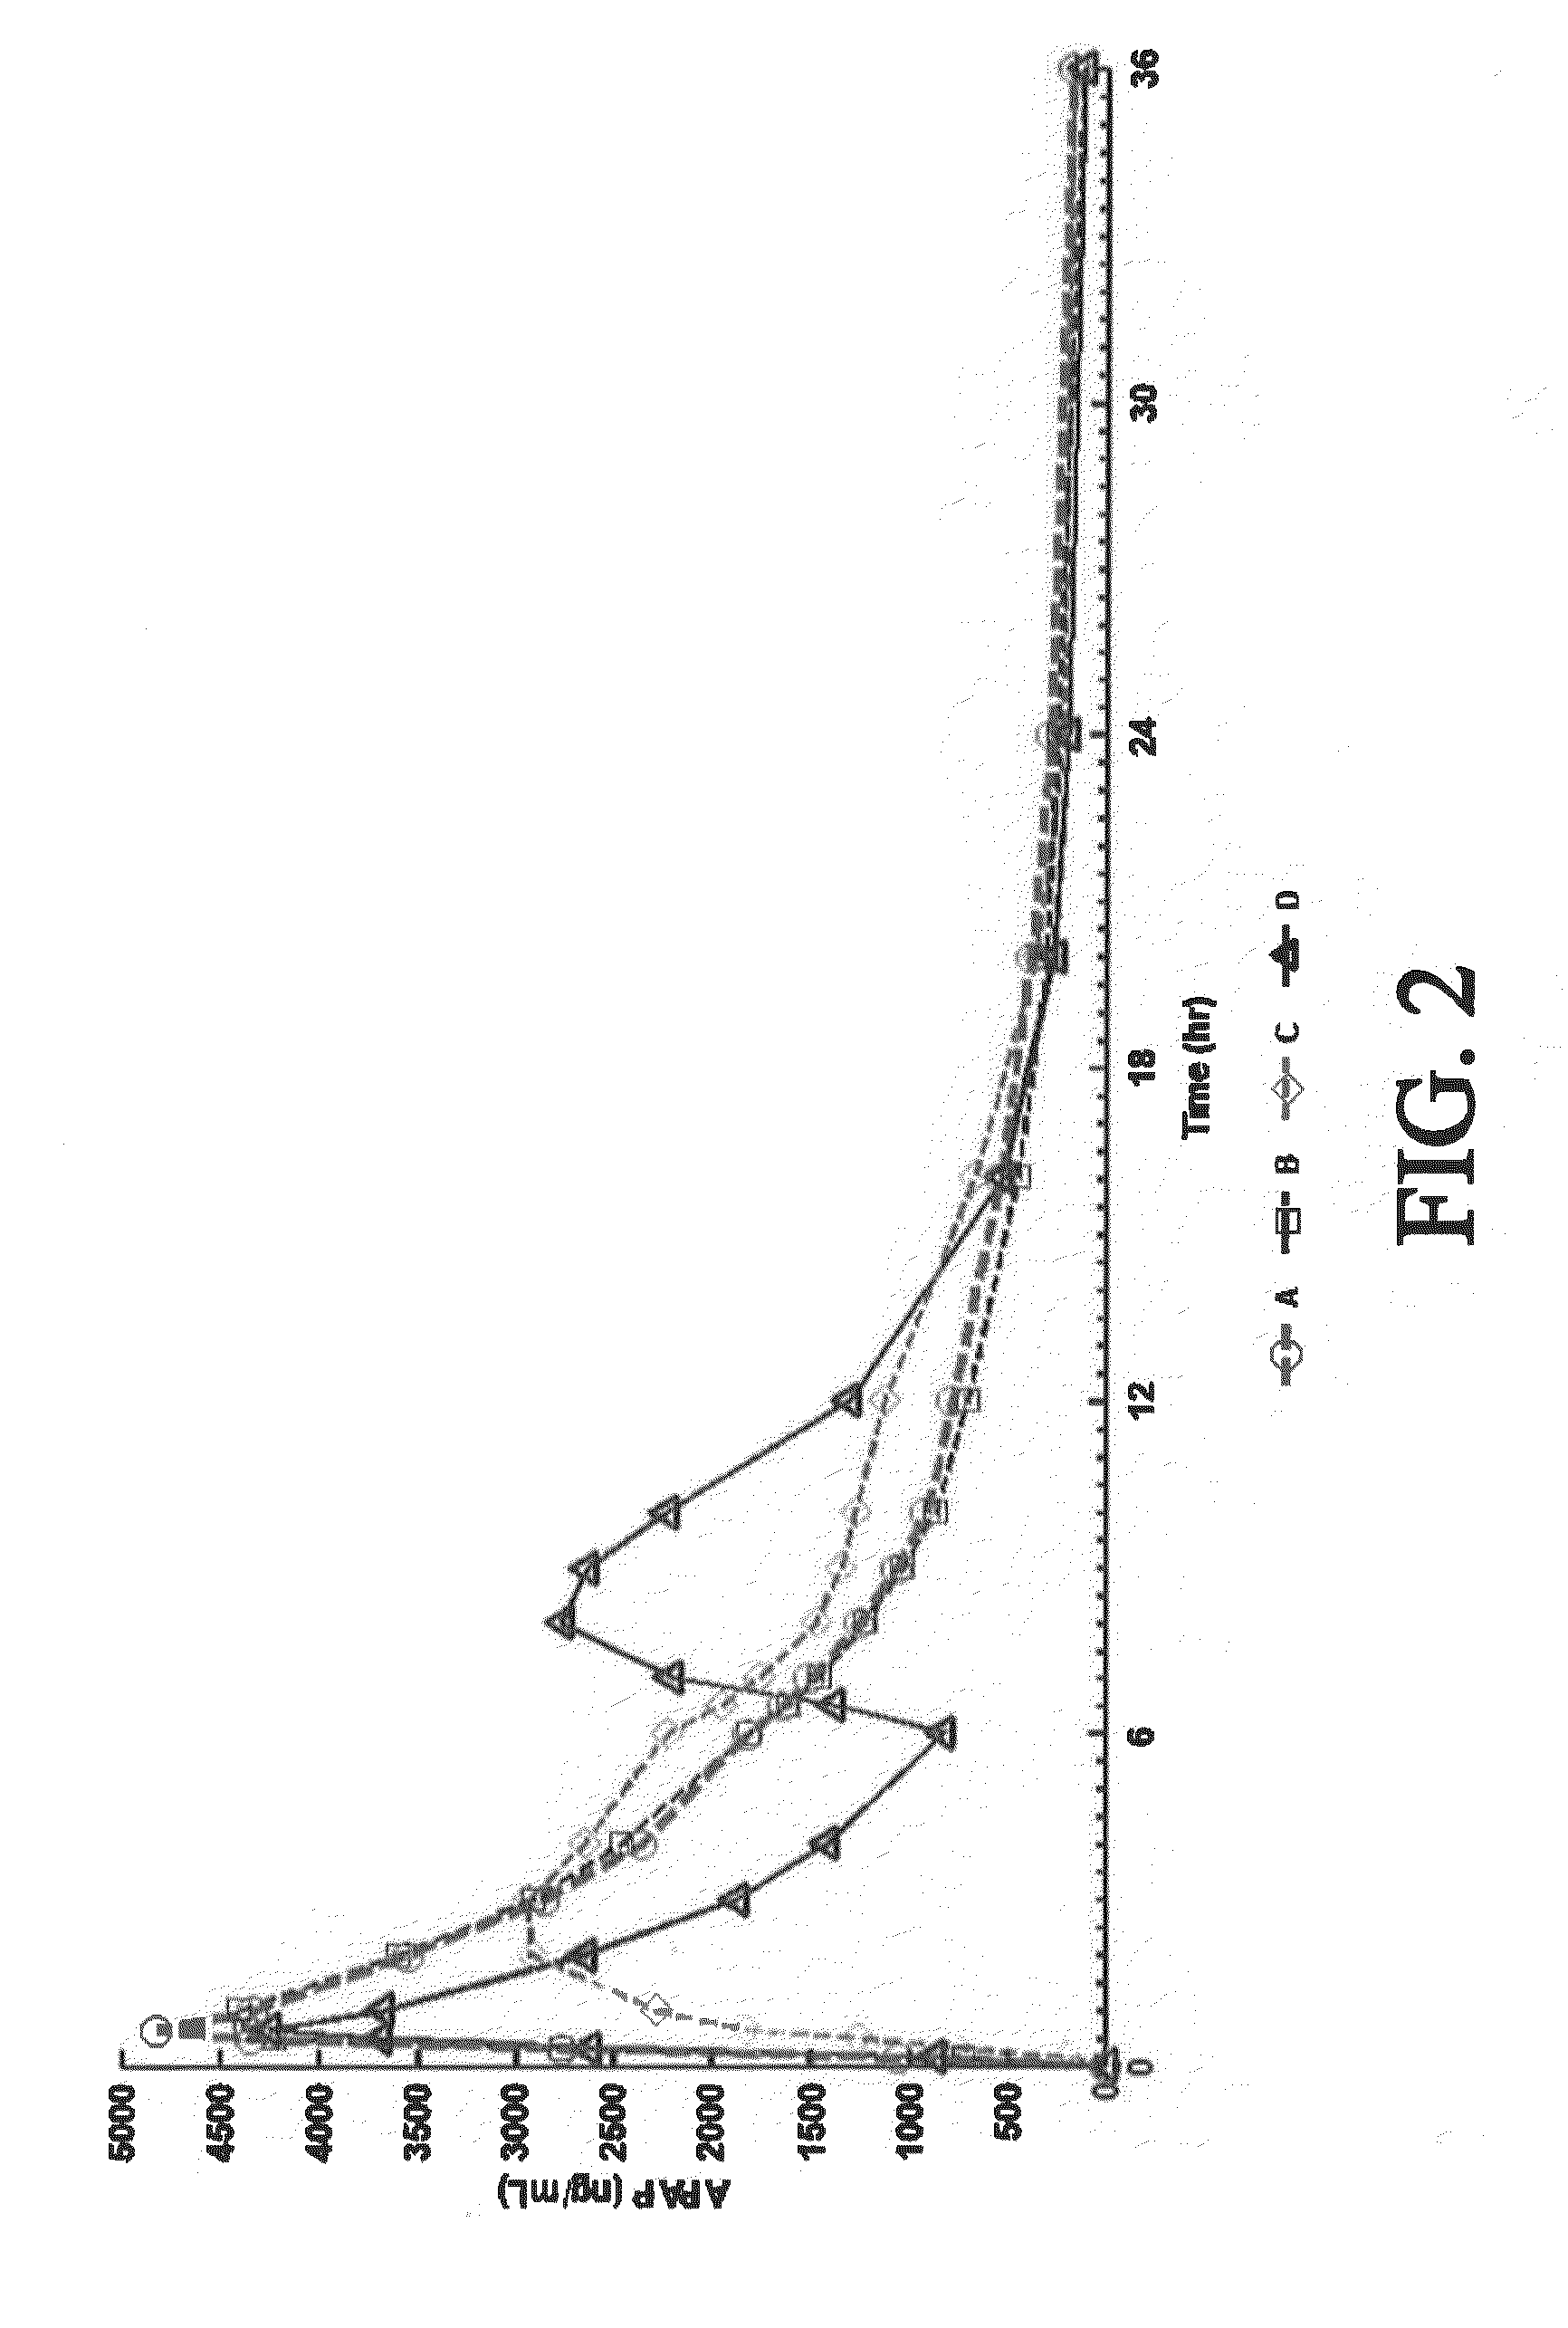 Extended Release Compositions Comprising Hydrocodone And Acetaminophen For Rapid Onset And Prolonged Analgesia That May Be Administered Without Regard To Food